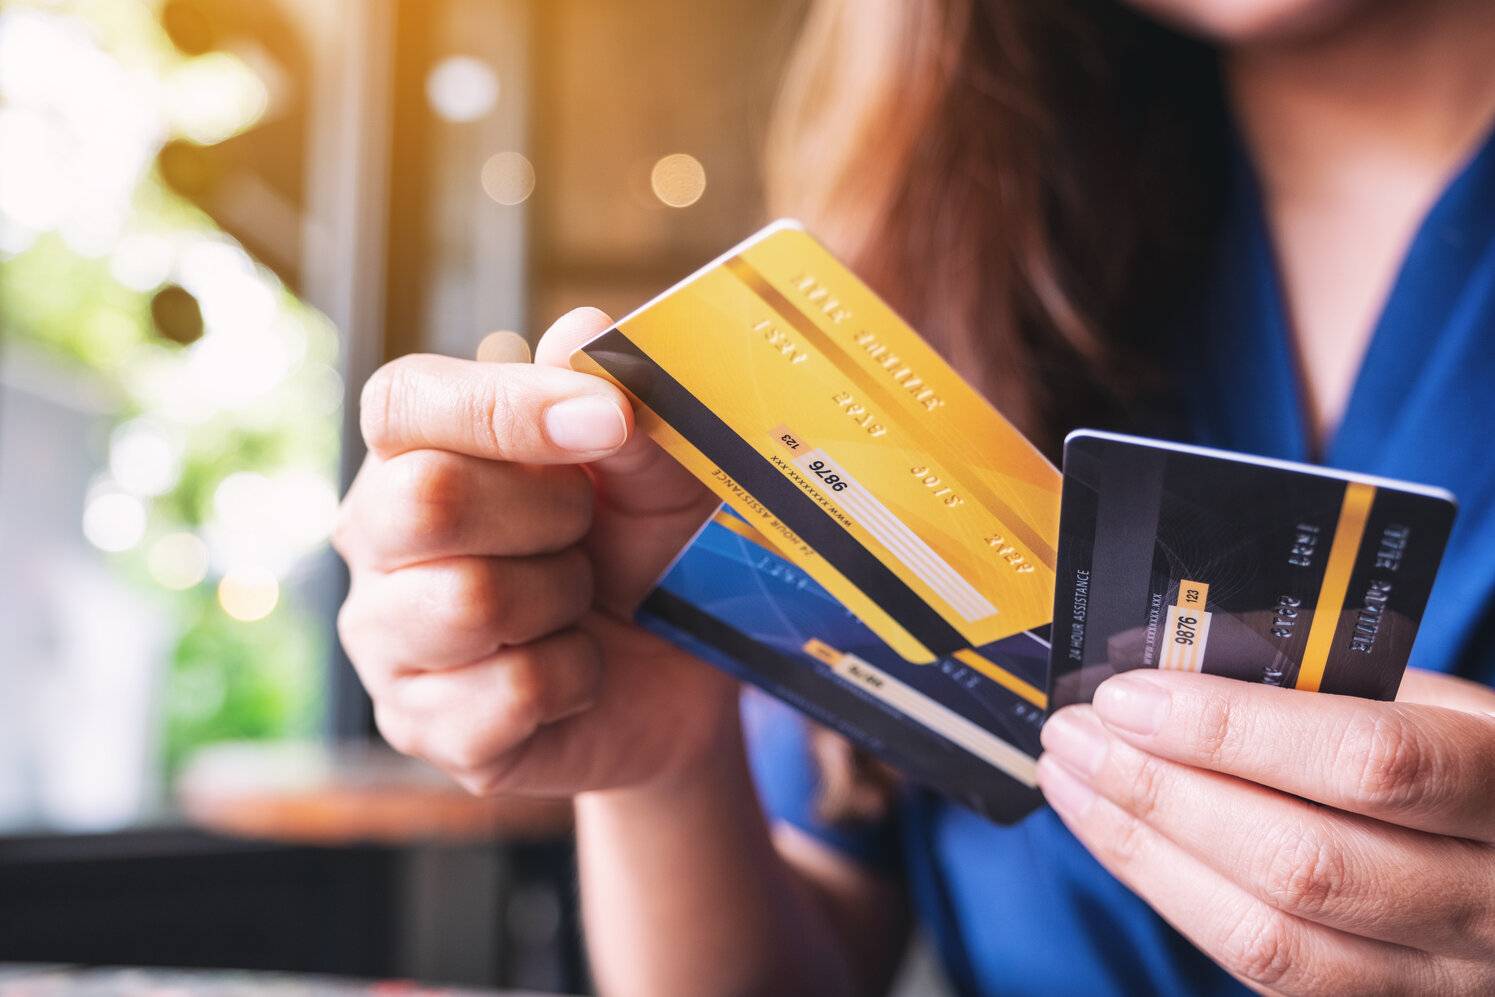 A thorough alternate is coming to the perfect device main bank cards work